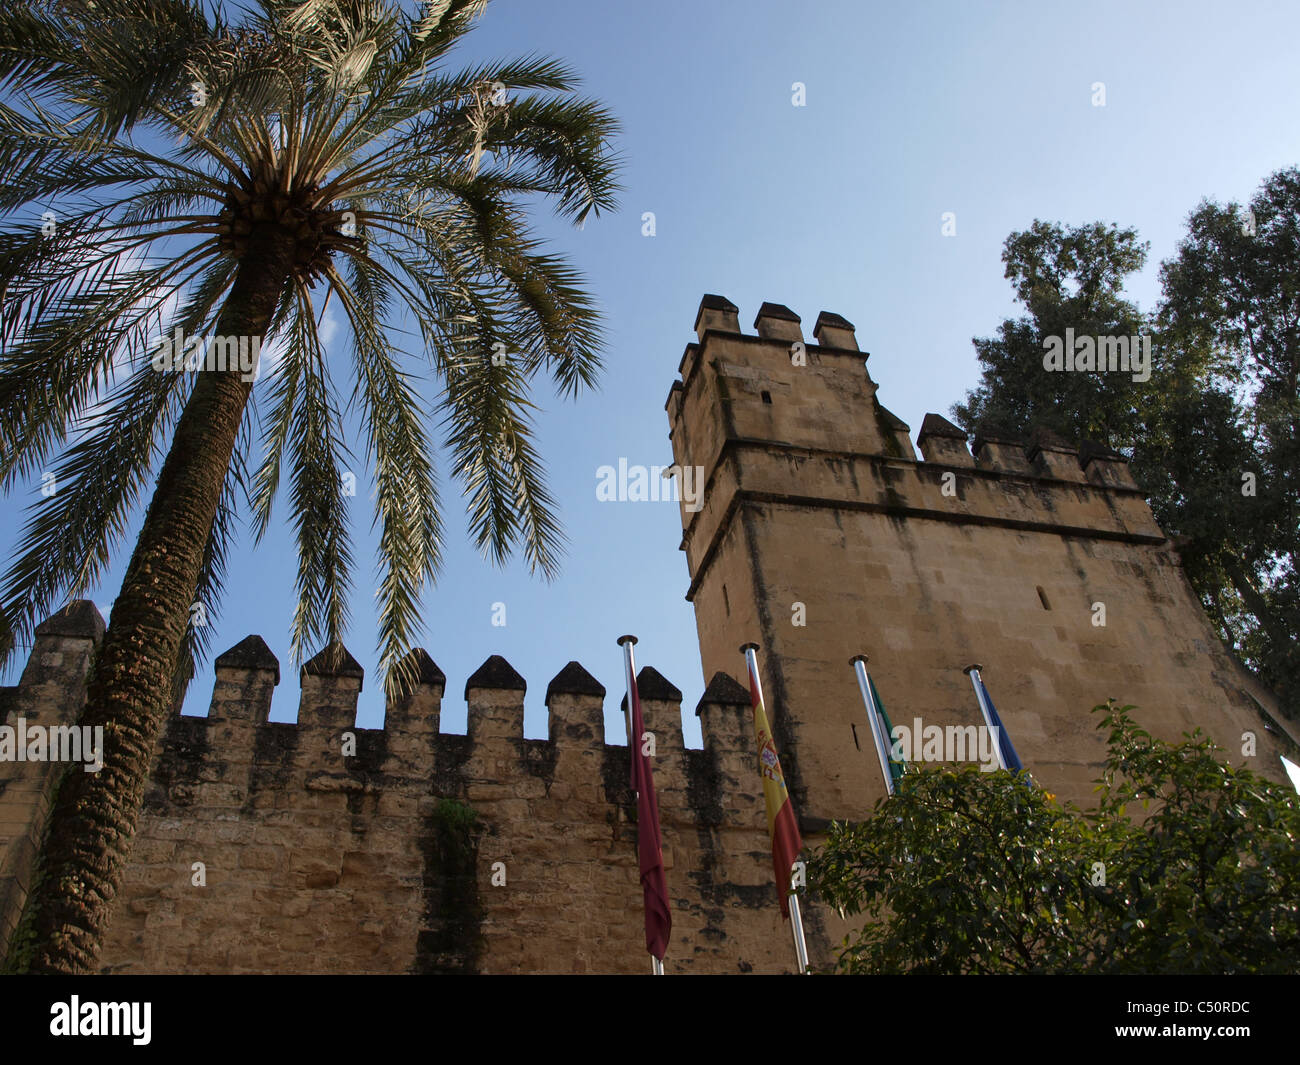 Some of the old fortress walls in Cordoba, Spain. Stock Photo